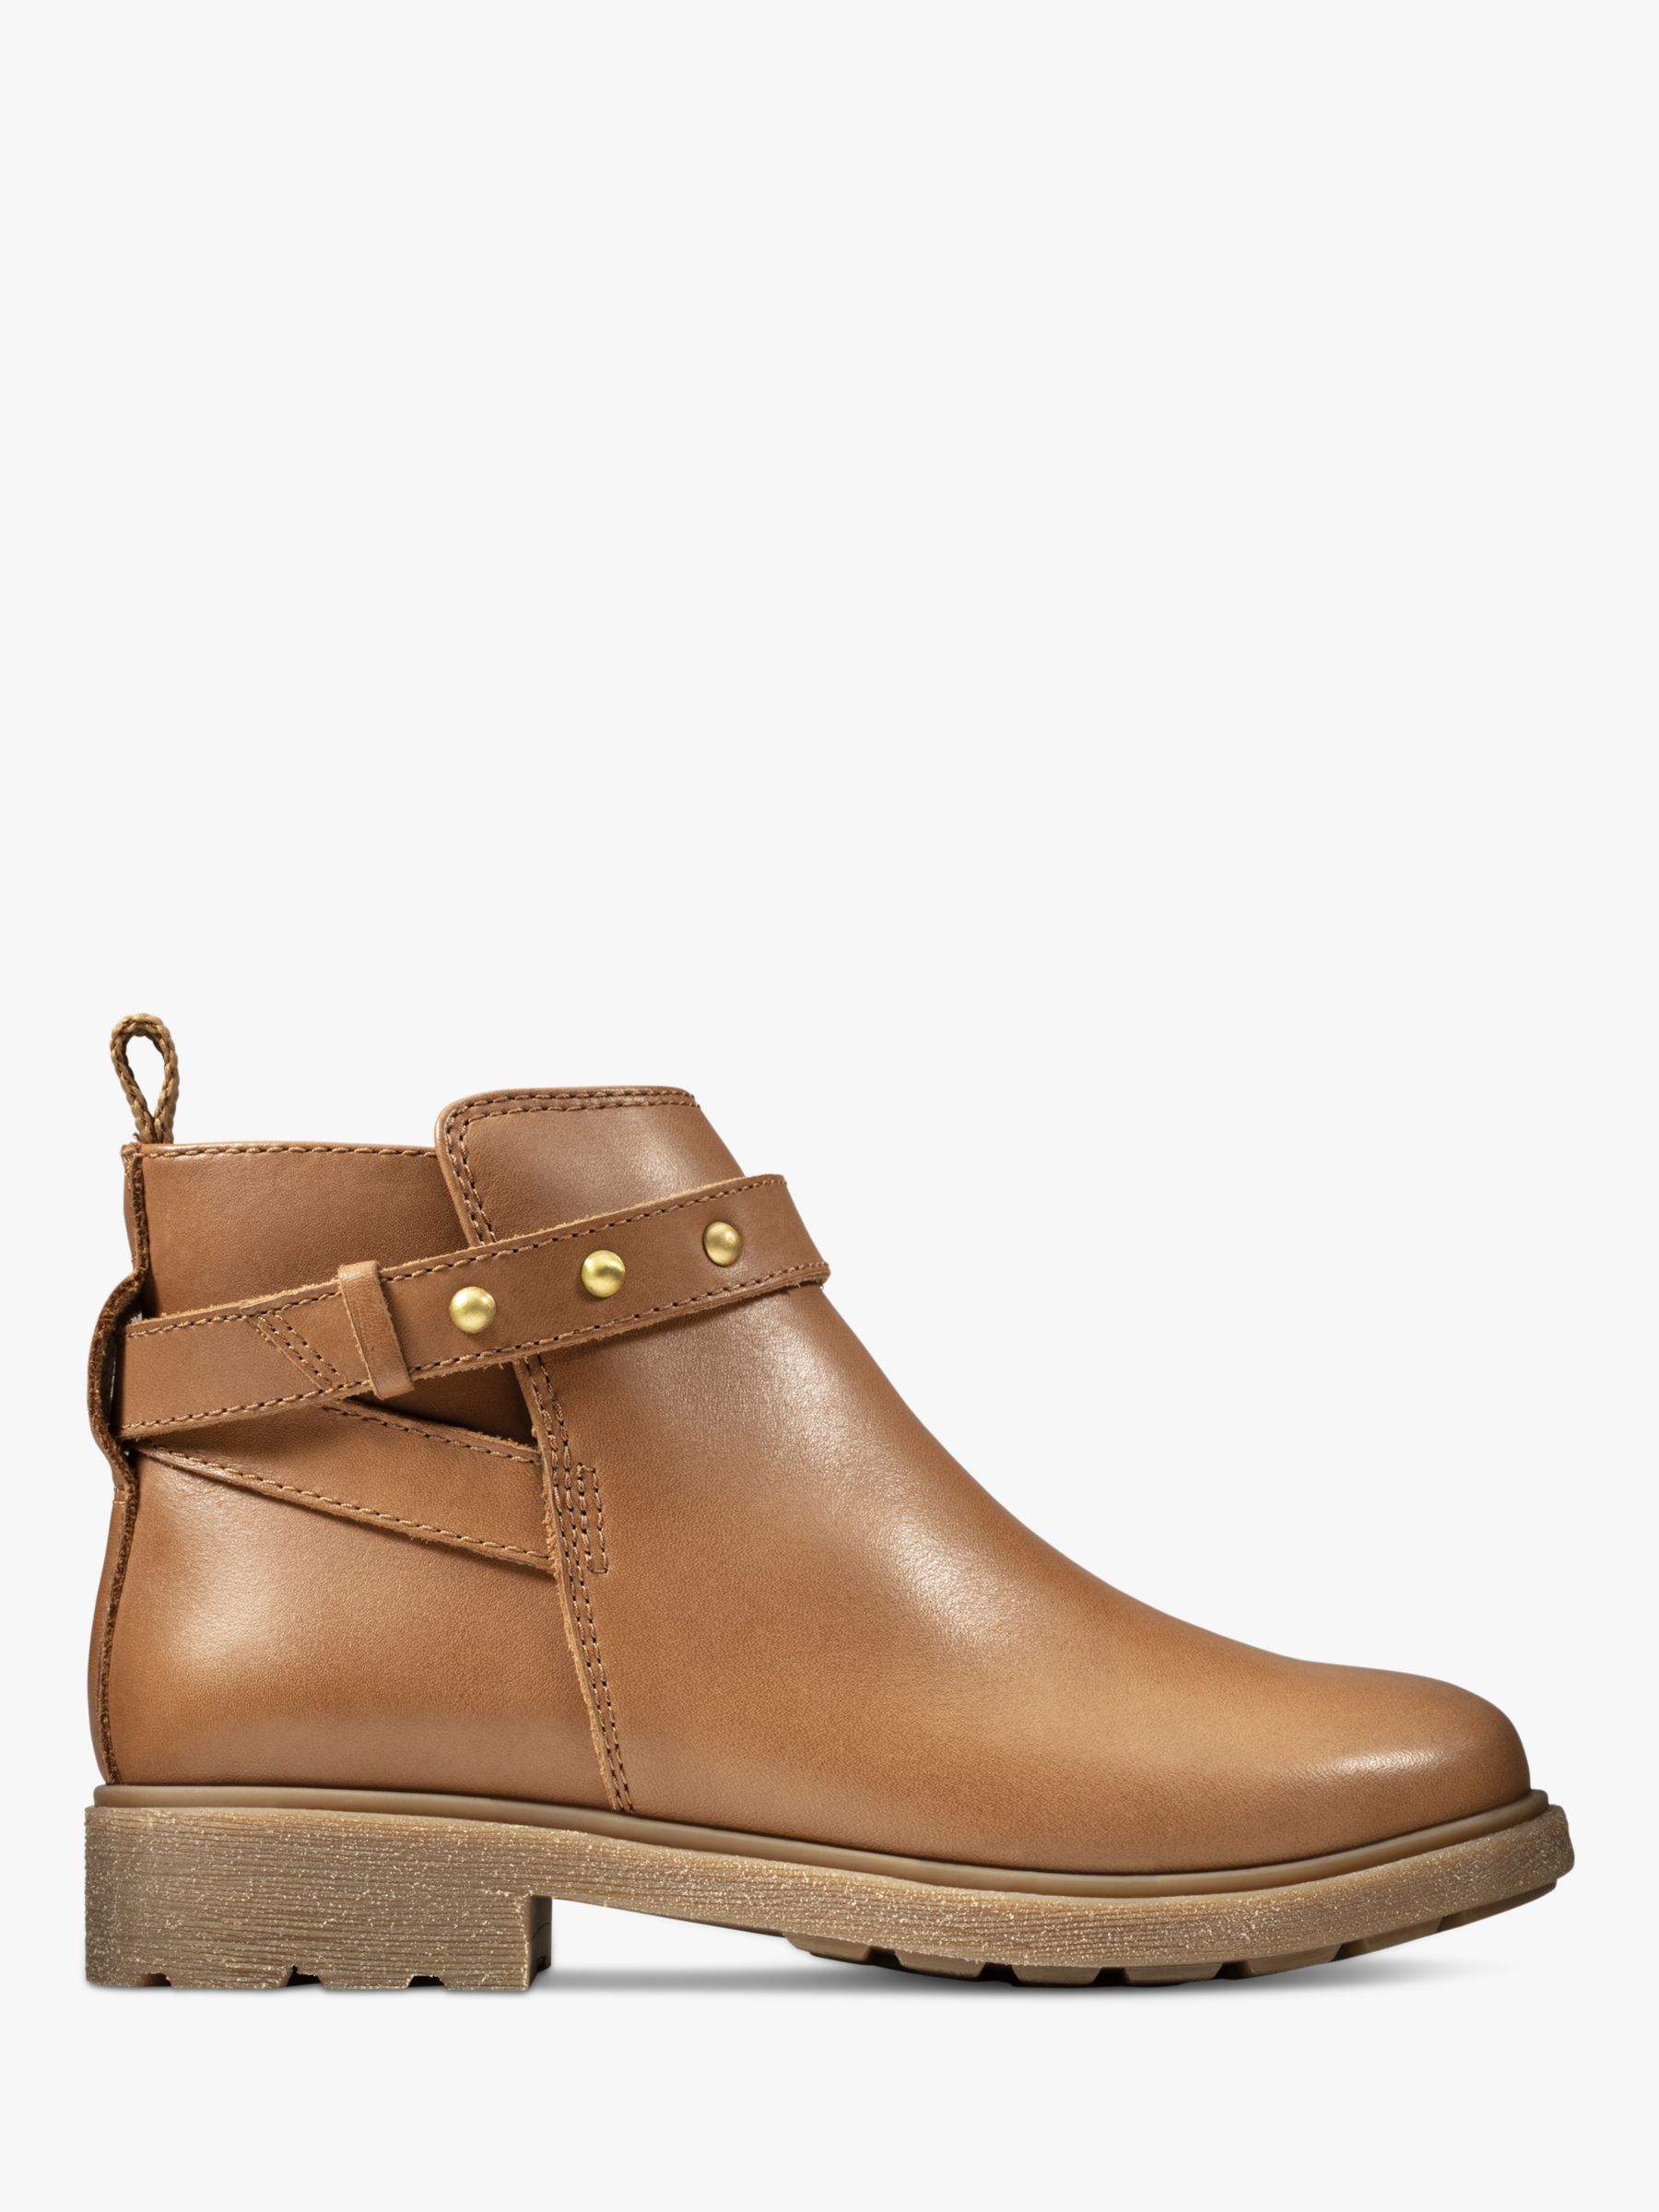 clarks children's ankle boots